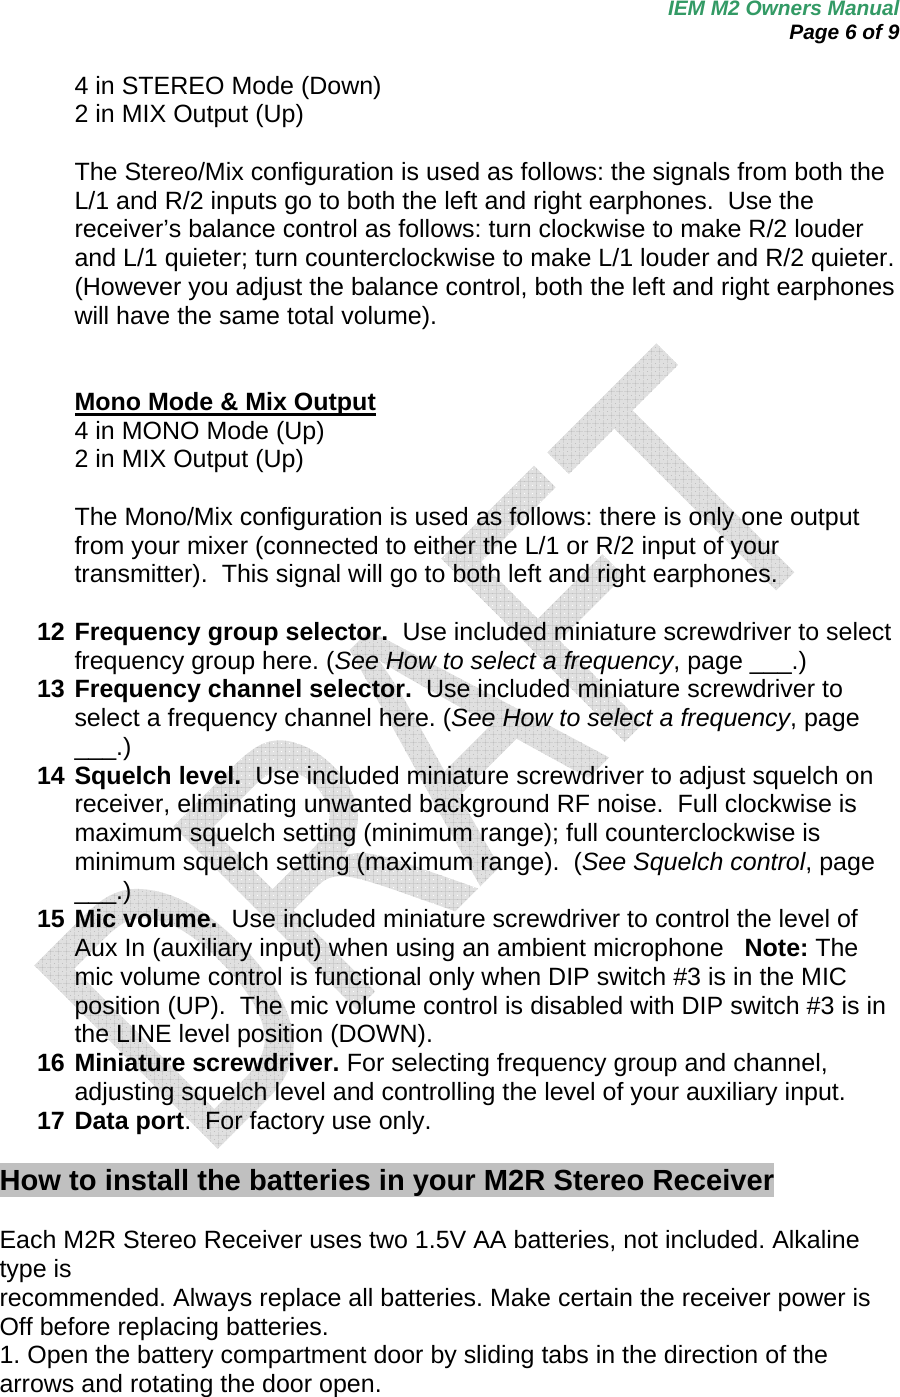 IEM M2 Owners Manual  Page 6 of 9  4 in STEREO Mode (Down)  2 in MIX Output (Up)  The Stereo/Mix configuration is used as follows: the signals from both the L/1 and R/2 inputs go to both the left and right earphones.  Use the receiver’s balance control as follows: turn clockwise to make R/2 louder and L/1 quieter; turn counterclockwise to make L/1 louder and R/2 quieter. (However you adjust the balance control, both the left and right earphones will have the same total volume).   Mono Mode &amp; Mix Output 4 in MONO Mode (Up)  2 in MIX Output (Up)  The Mono/Mix configuration is used as follows: there is only one output from your mixer (connected to either the L/1 or R/2 input of your transmitter).  This signal will go to both left and right earphones.  12 Frequency group selector.  Use included miniature screwdriver to select frequency group here. (See How to select a frequency, page ___.) 13 Frequency channel selector.  Use included miniature screwdriver to select a frequency channel here. (See How to select a frequency, page ___.) 14 Squelch level.  Use included miniature screwdriver to adjust squelch on receiver, eliminating unwanted background RF noise.  Full clockwise is maximum squelch setting (minimum range); full counterclockwise is minimum squelch setting (maximum range).  (See Squelch control, page ___.)  15 Mic volume.  Use included miniature screwdriver to control the level of Aux In (auxiliary input) when using an ambient microphone   Note: The mic volume control is functional only when DIP switch #3 is in the MIC position (UP).  The mic volume control is disabled with DIP switch #3 is in the LINE level position (DOWN). 16 Miniature screwdriver. For selecting frequency group and channel, adjusting squelch level and controlling the level of your auxiliary input.  17 Data port.  For factory use only.  How to install the batteries in your M2R Stereo Receiver    Each M2R Stereo Receiver uses two 1.5V AA batteries, not included. Alkaline type is recommended. Always replace all batteries. Make certain the receiver power is Off before replacing batteries.   1. Open the battery compartment door by sliding tabs in the direction of the arrows and rotating the door open. 